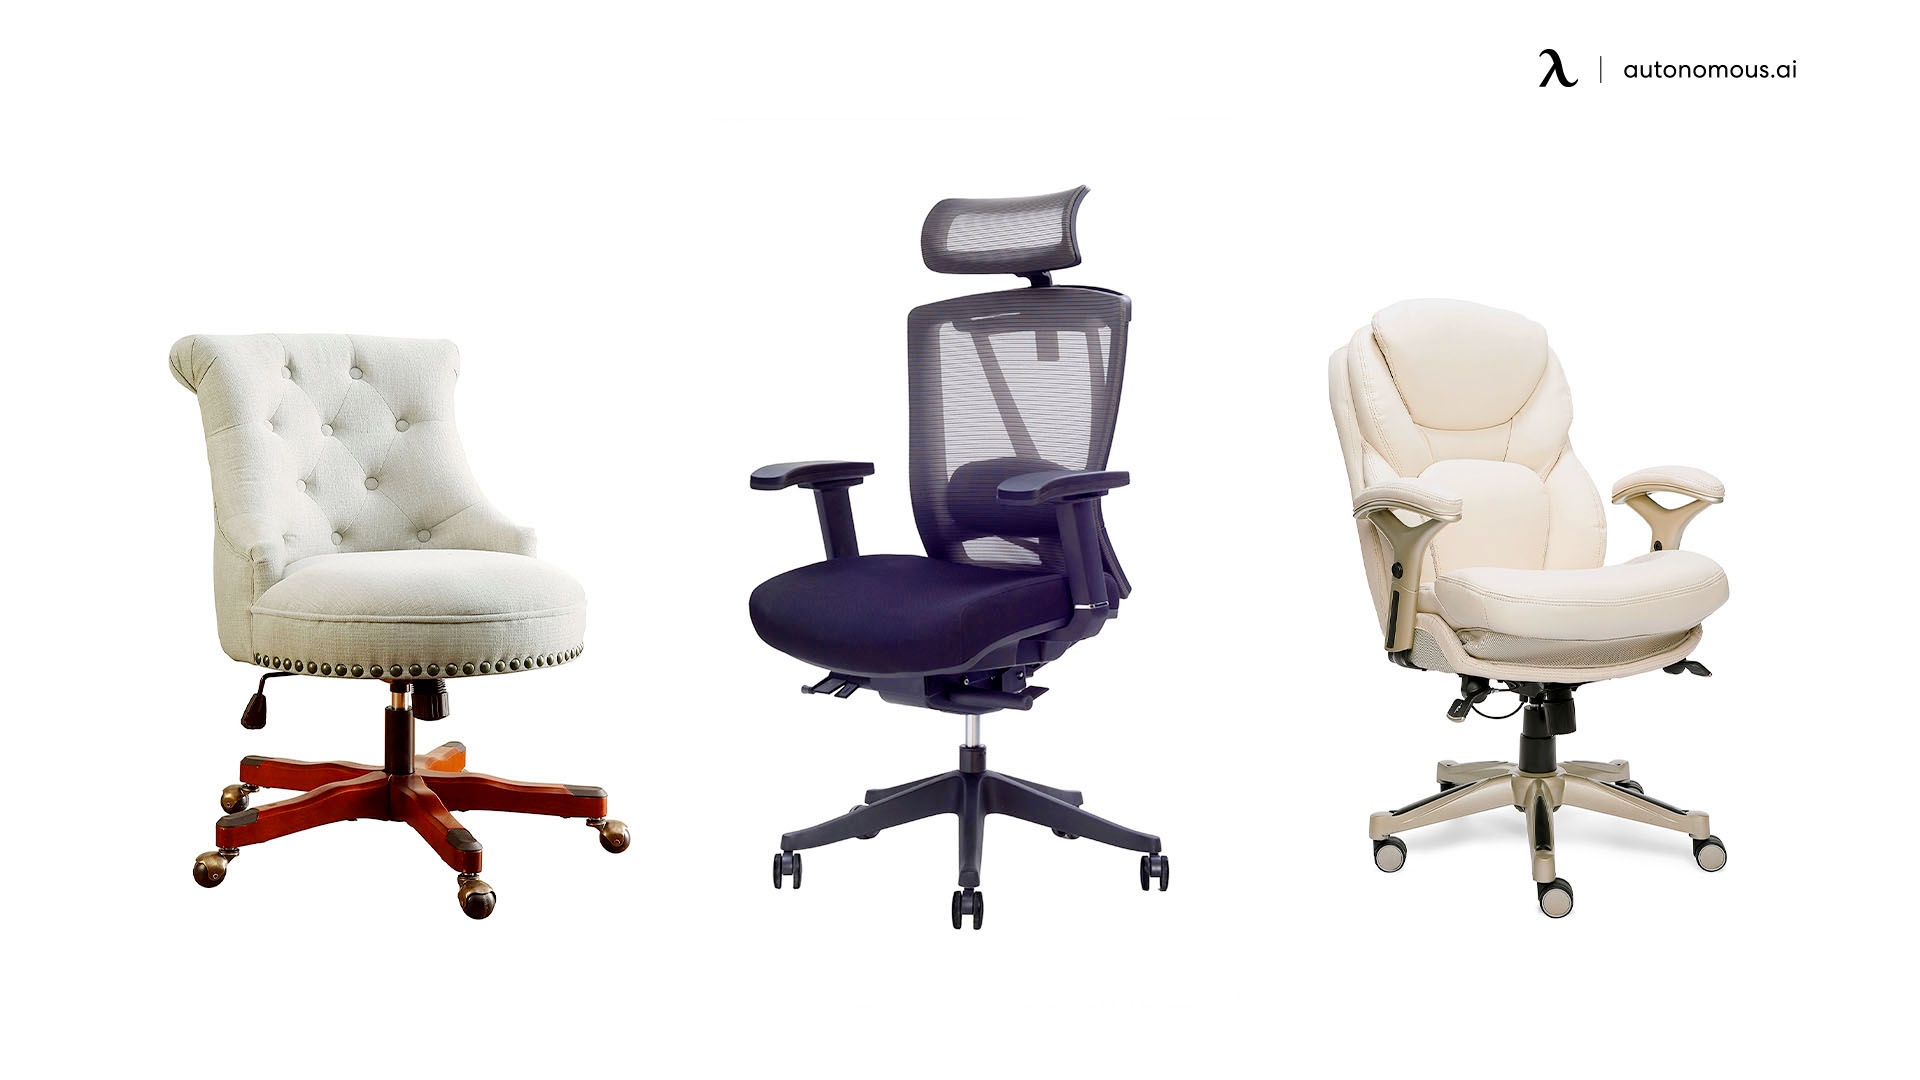 Different Types of Desk Chairs – Which is Best?